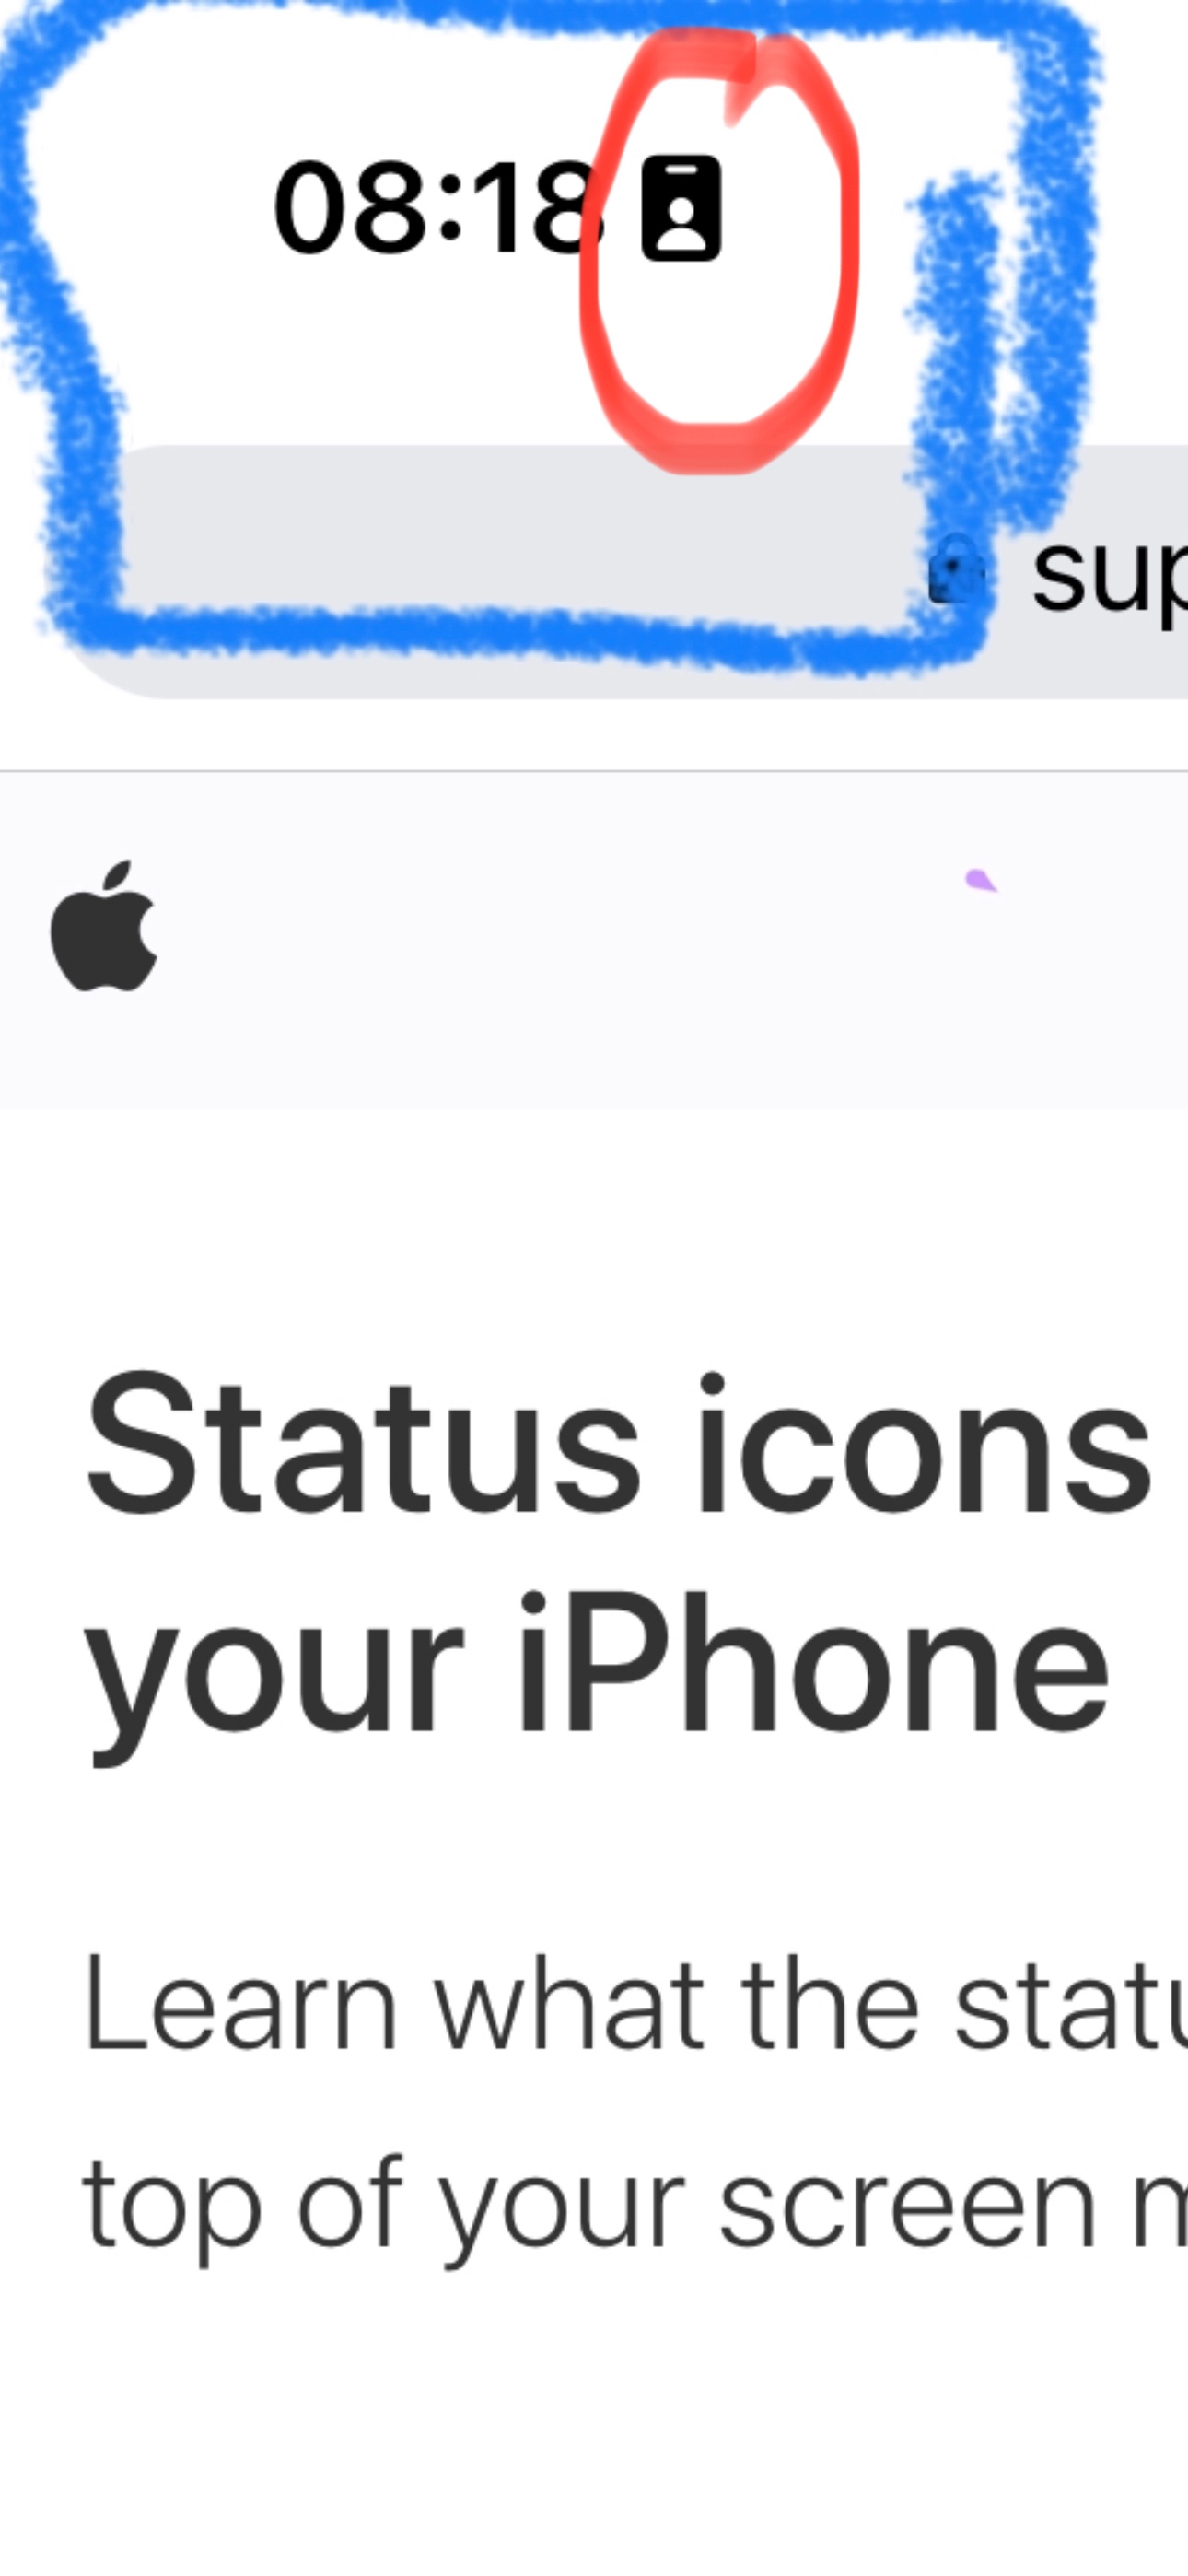 Unknown icon on my iPhone - Apple Community